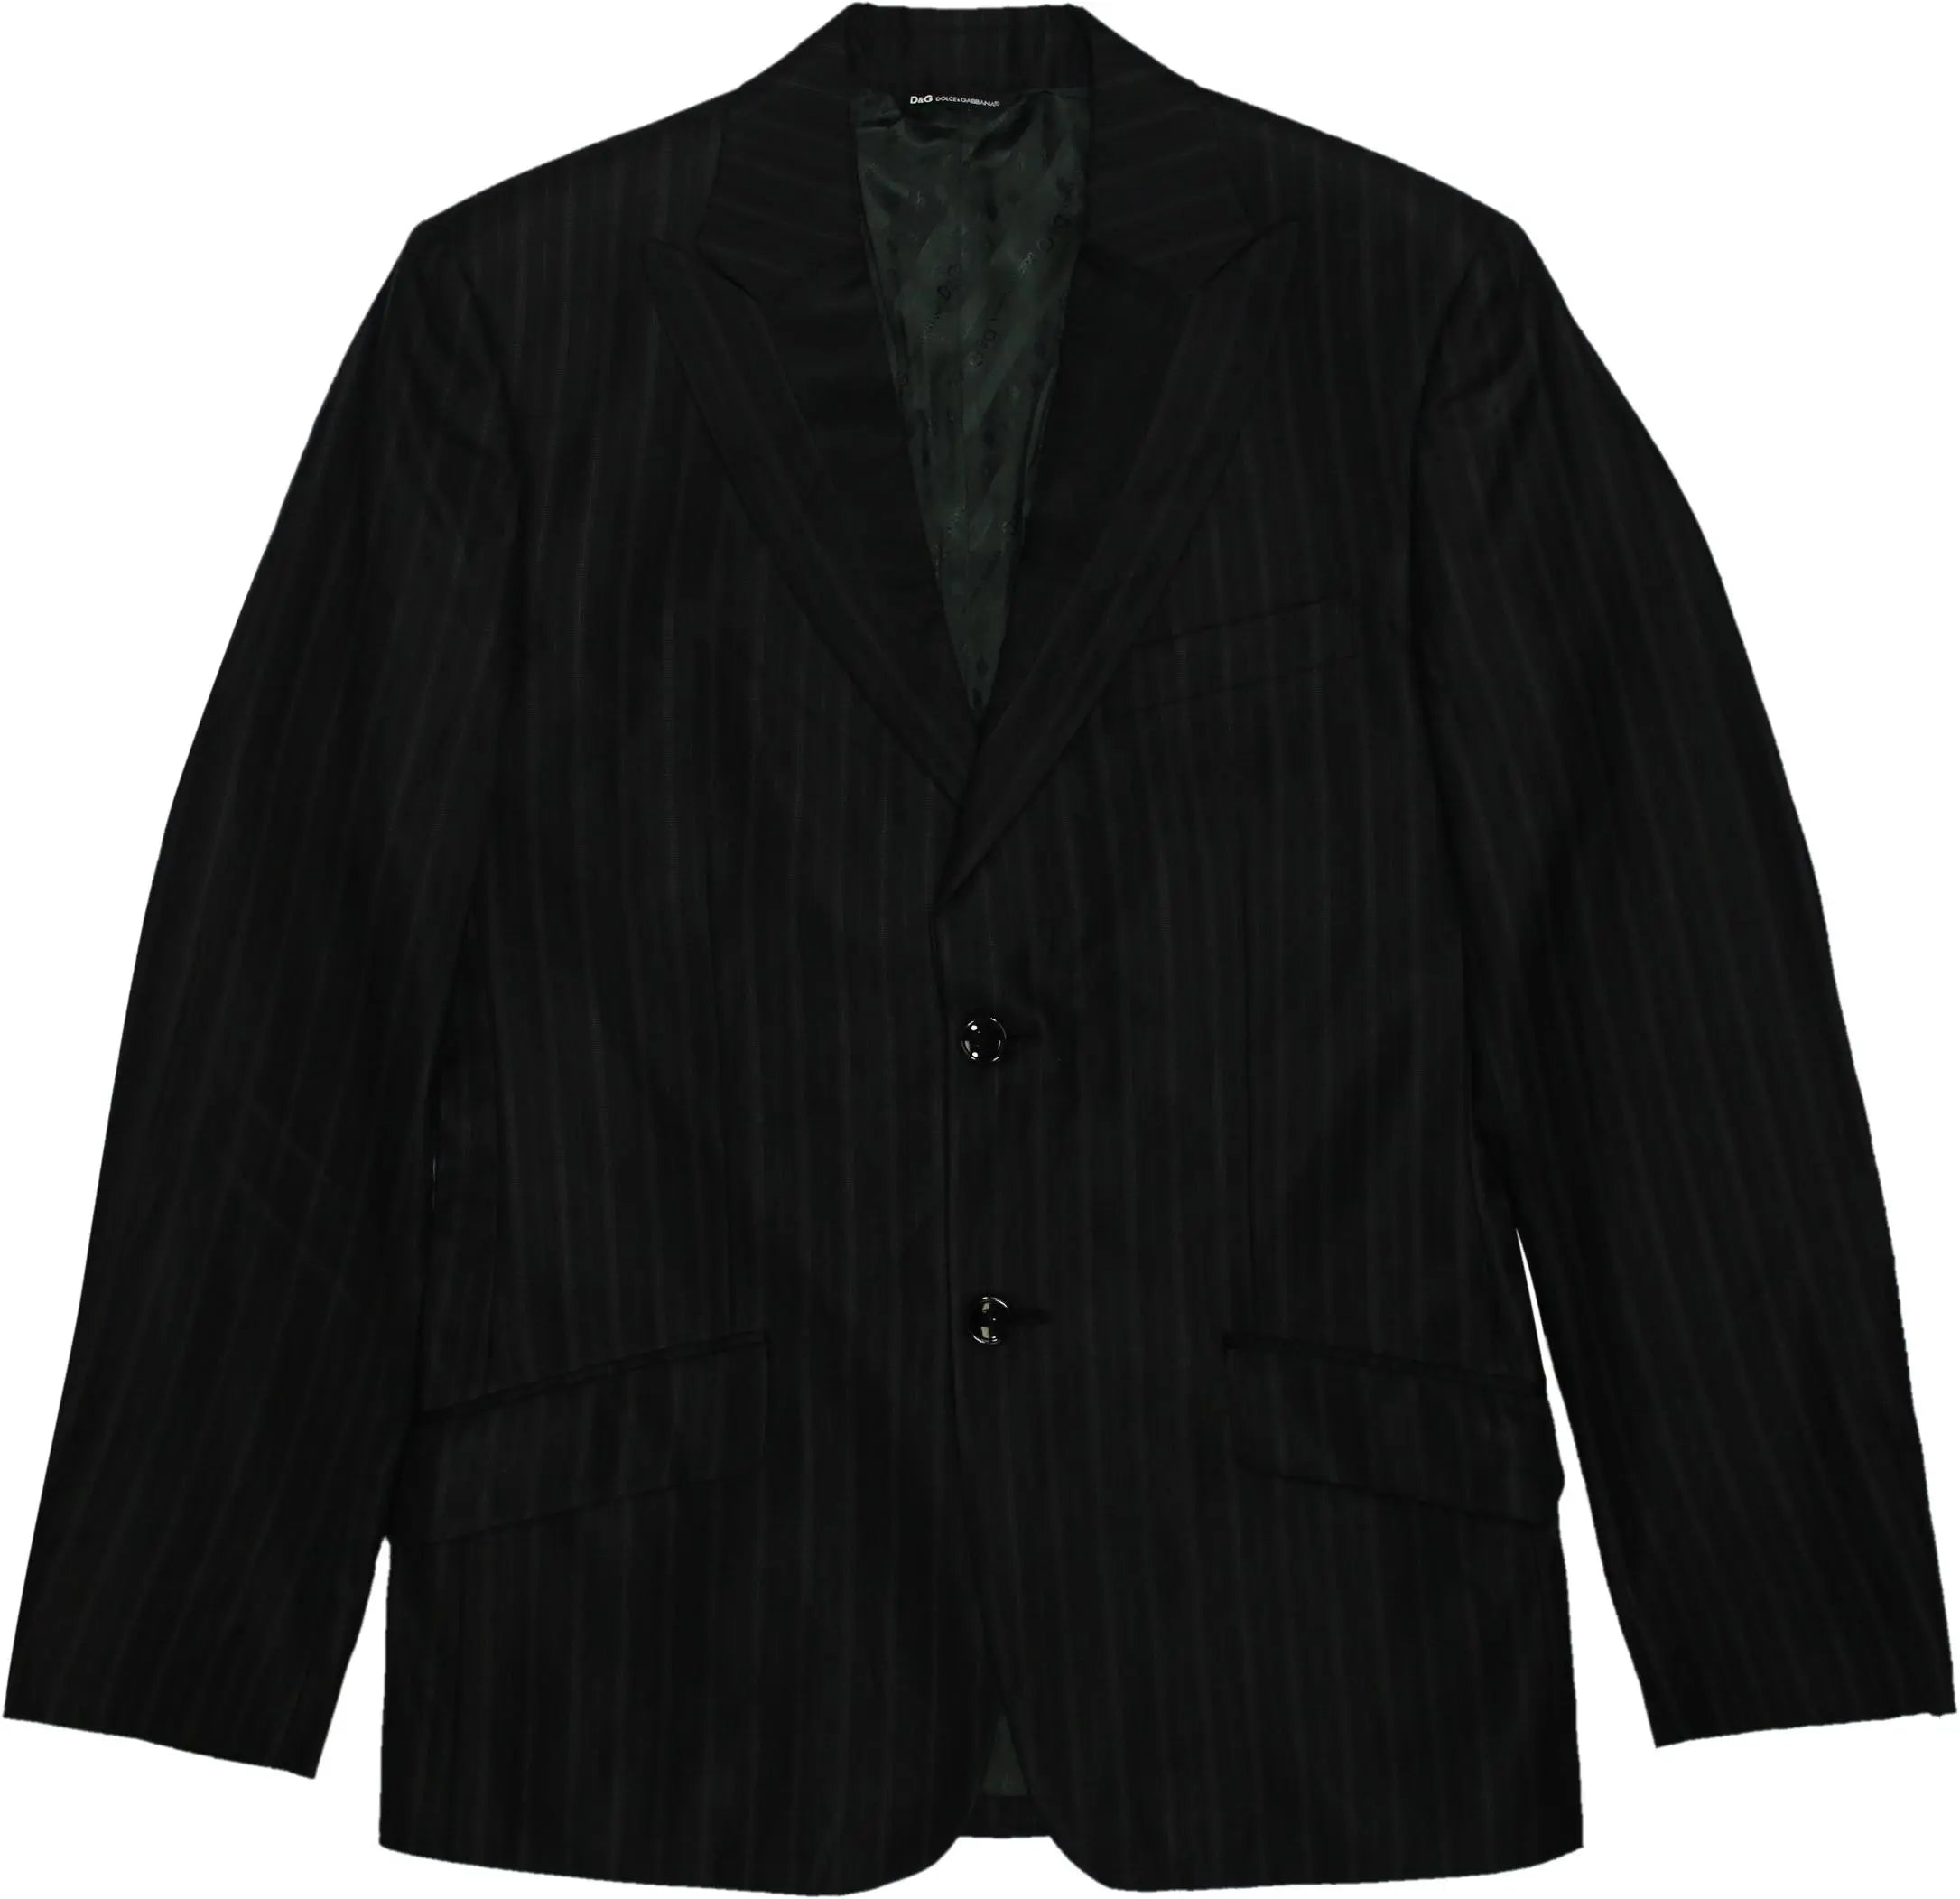 Dolce & Gabbana - Striped Black Blazer by Dolce & Gabanna- ThriftTale.com - Vintage and second handclothing